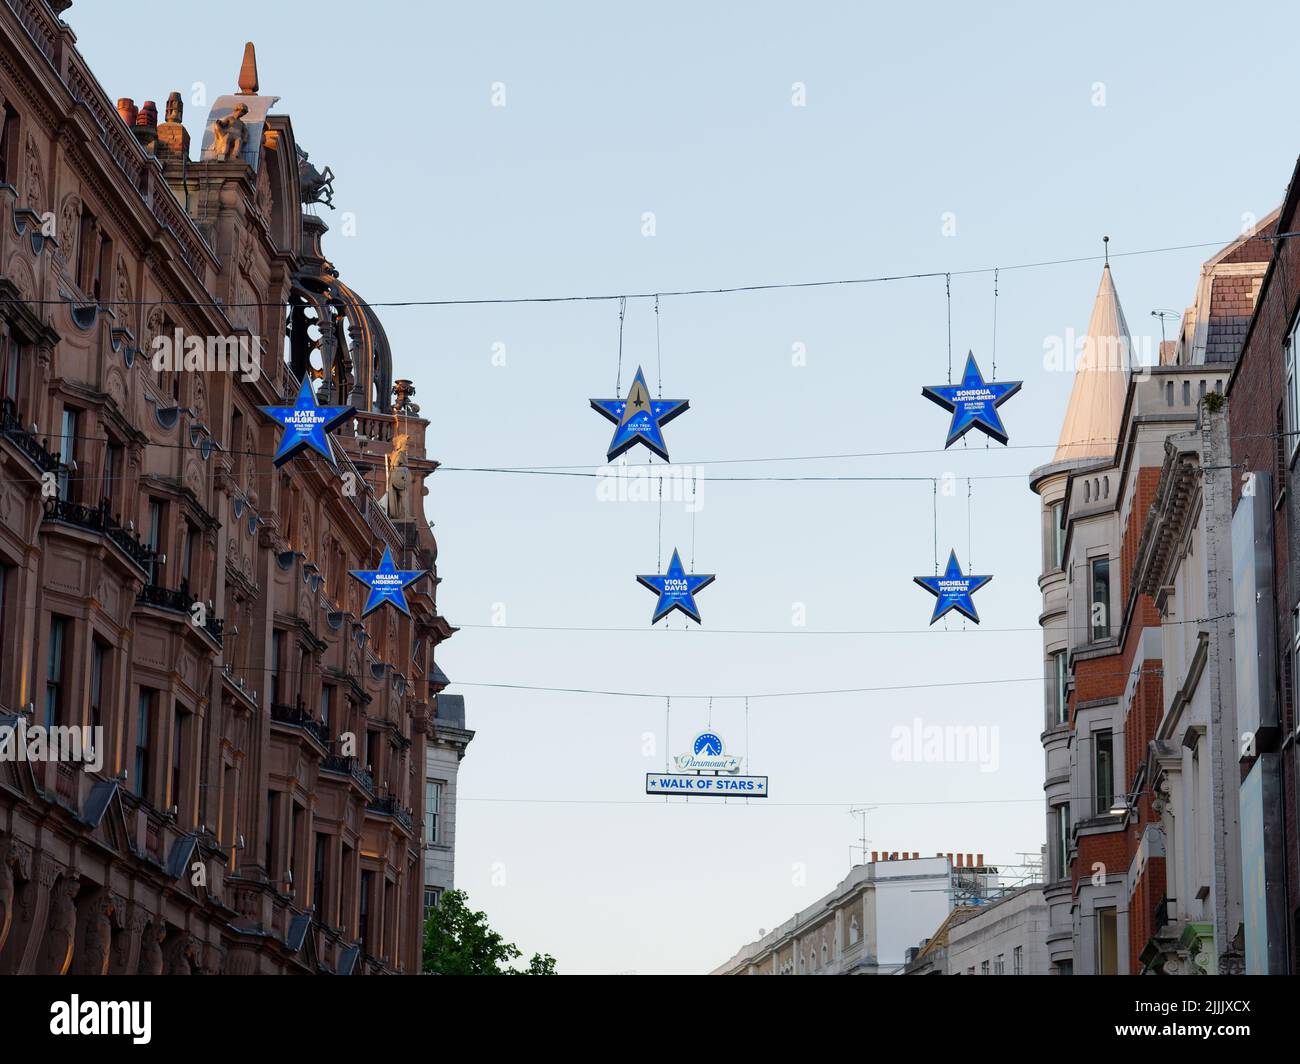 London, Greater London, England, June 22 2022: Hanging blue stars as part of the Walk of Stars in Leicester square Stock Photo